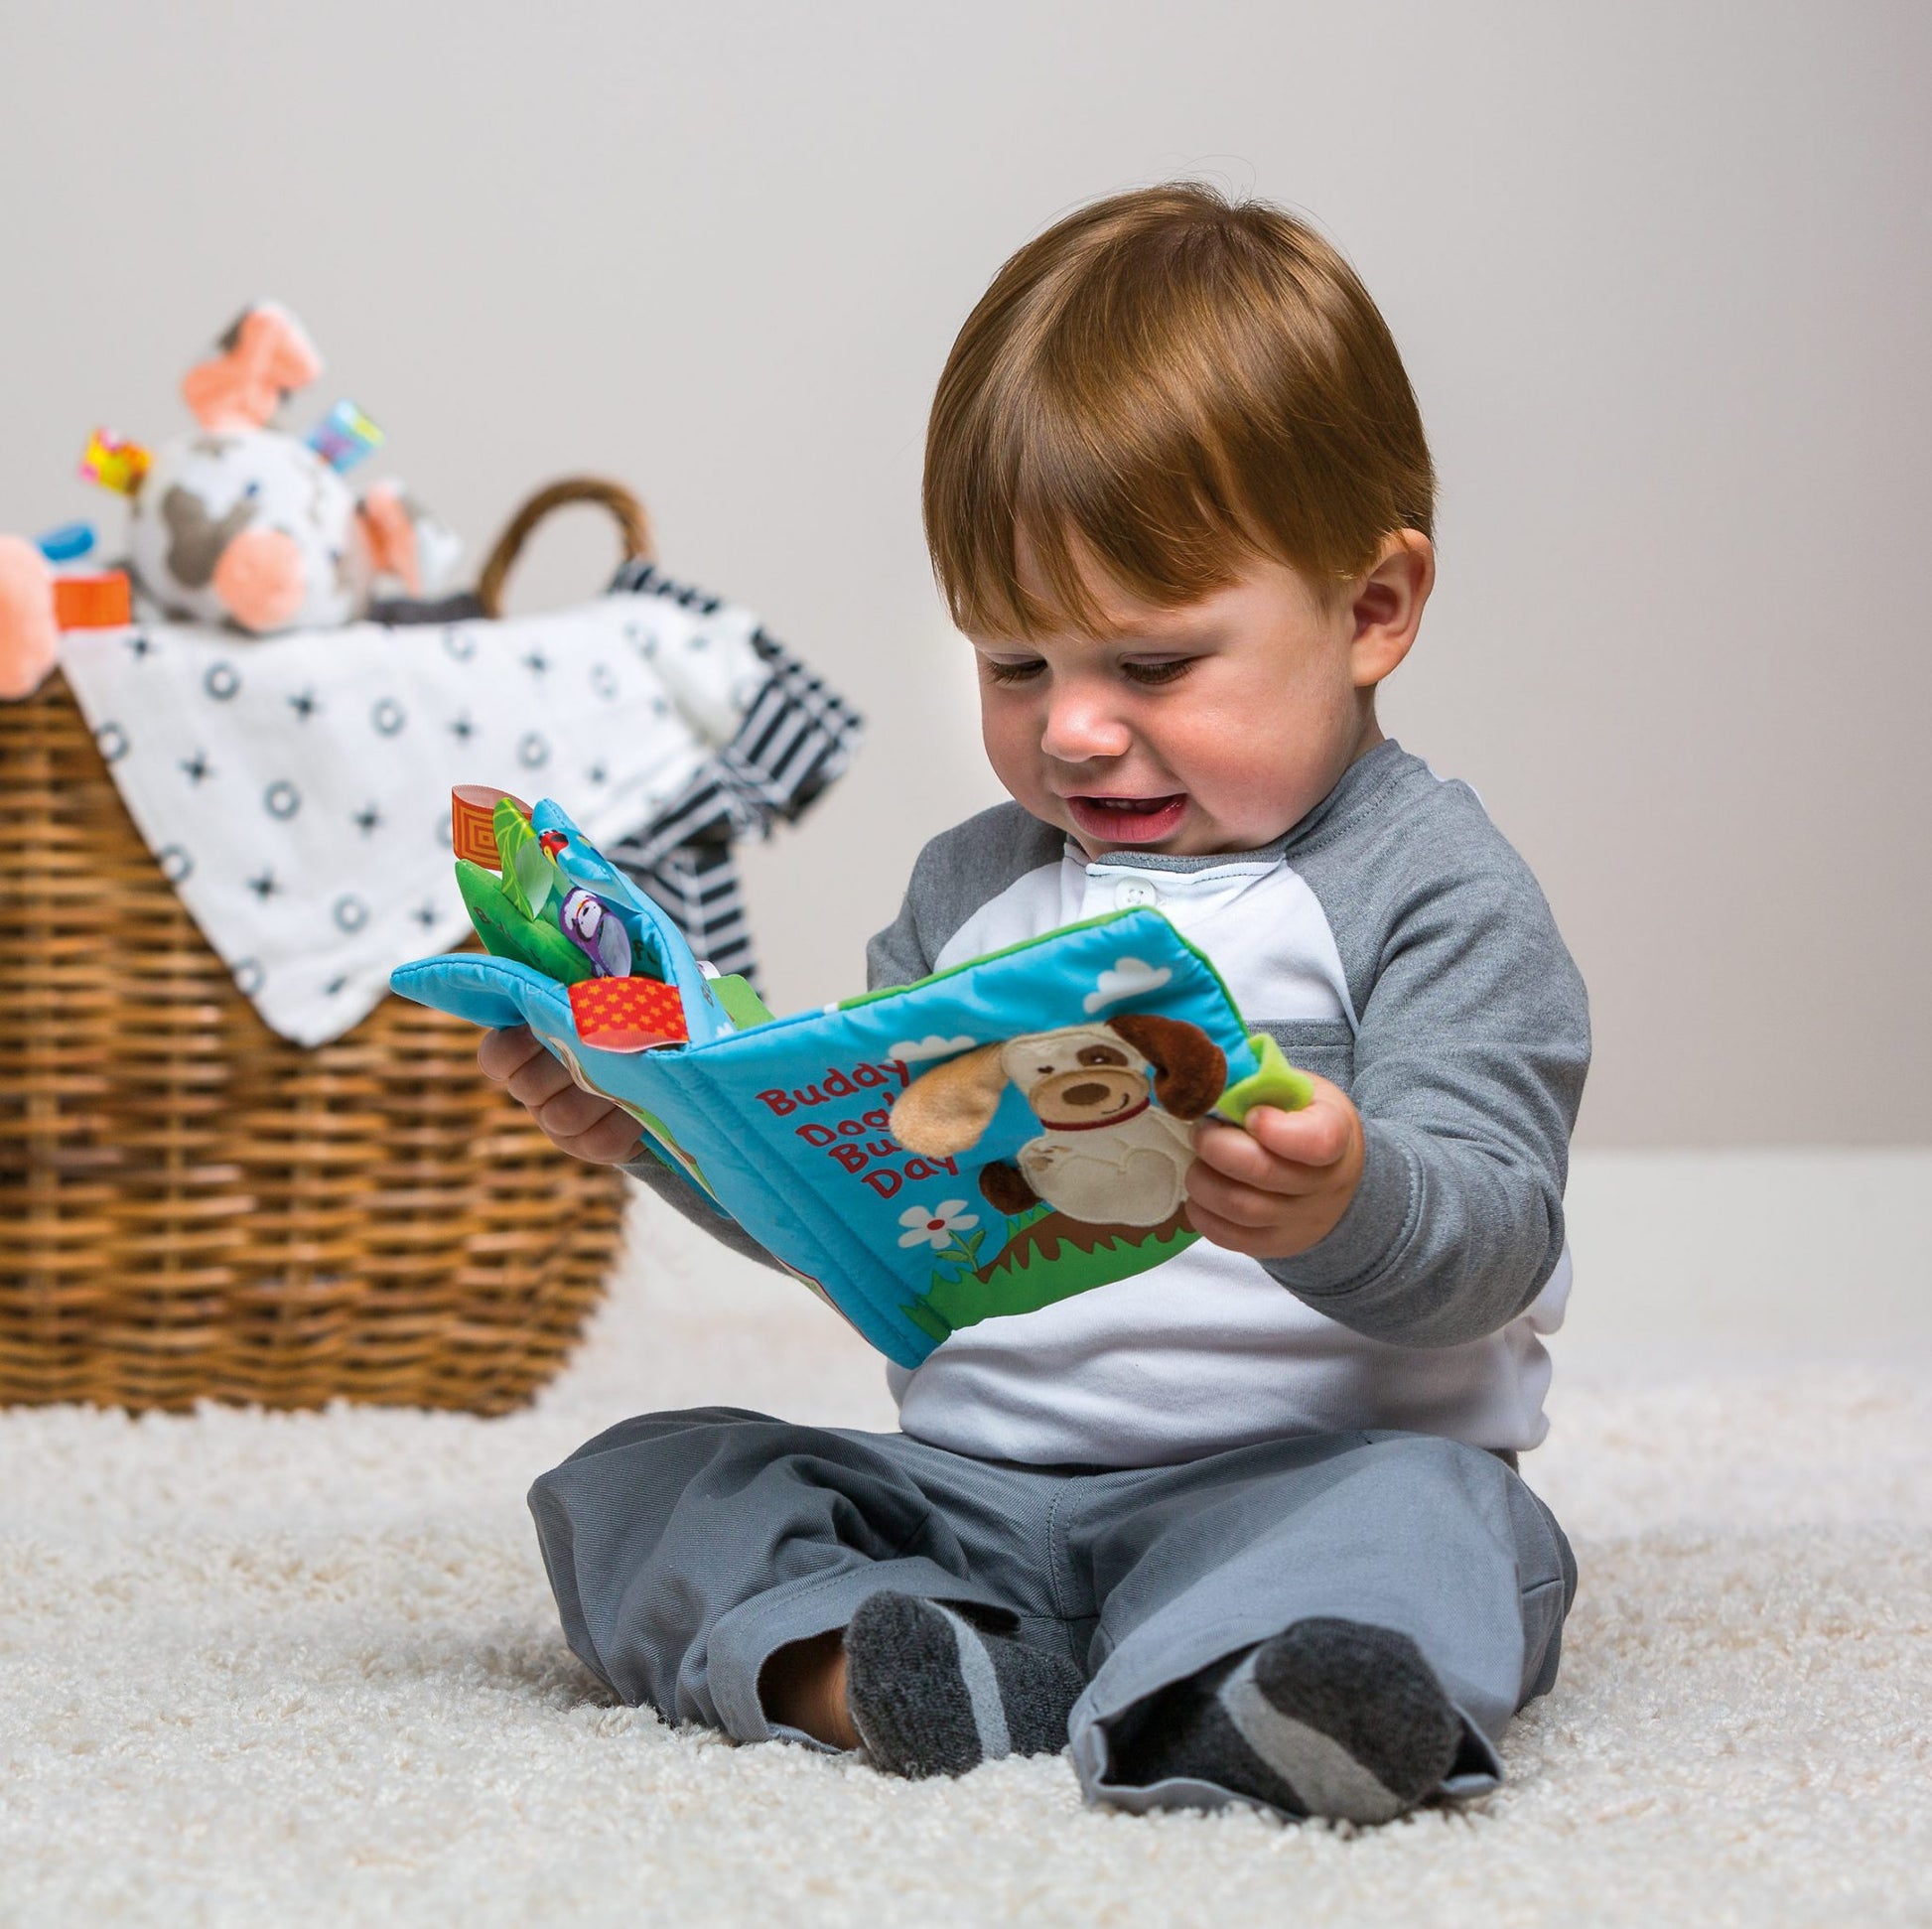 a little boy looking at the buddy dog soft book while sitting on a white rug next to a basket of toys